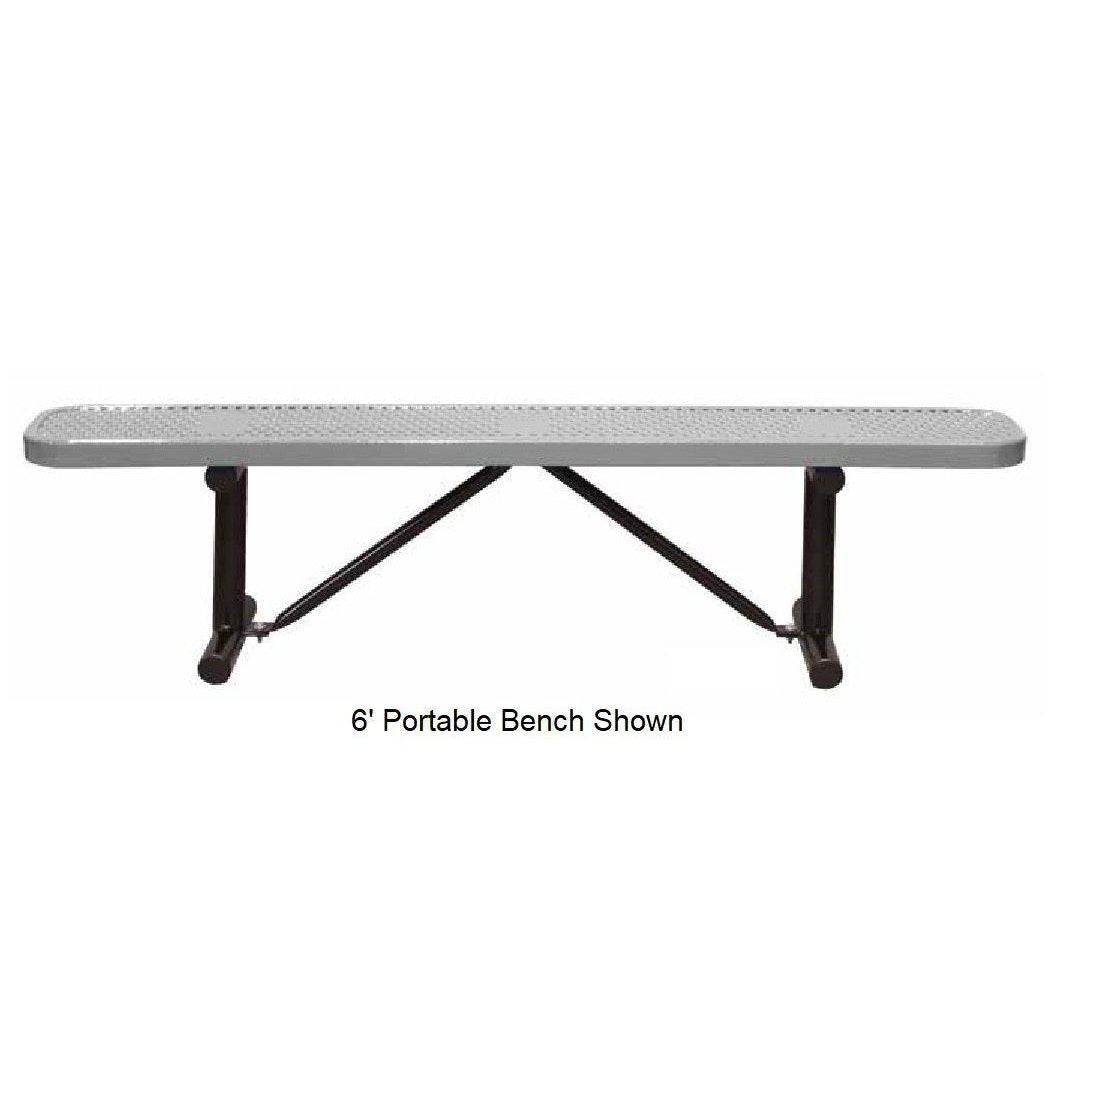 10’ Standard Perforated Bench Without Back, Portable